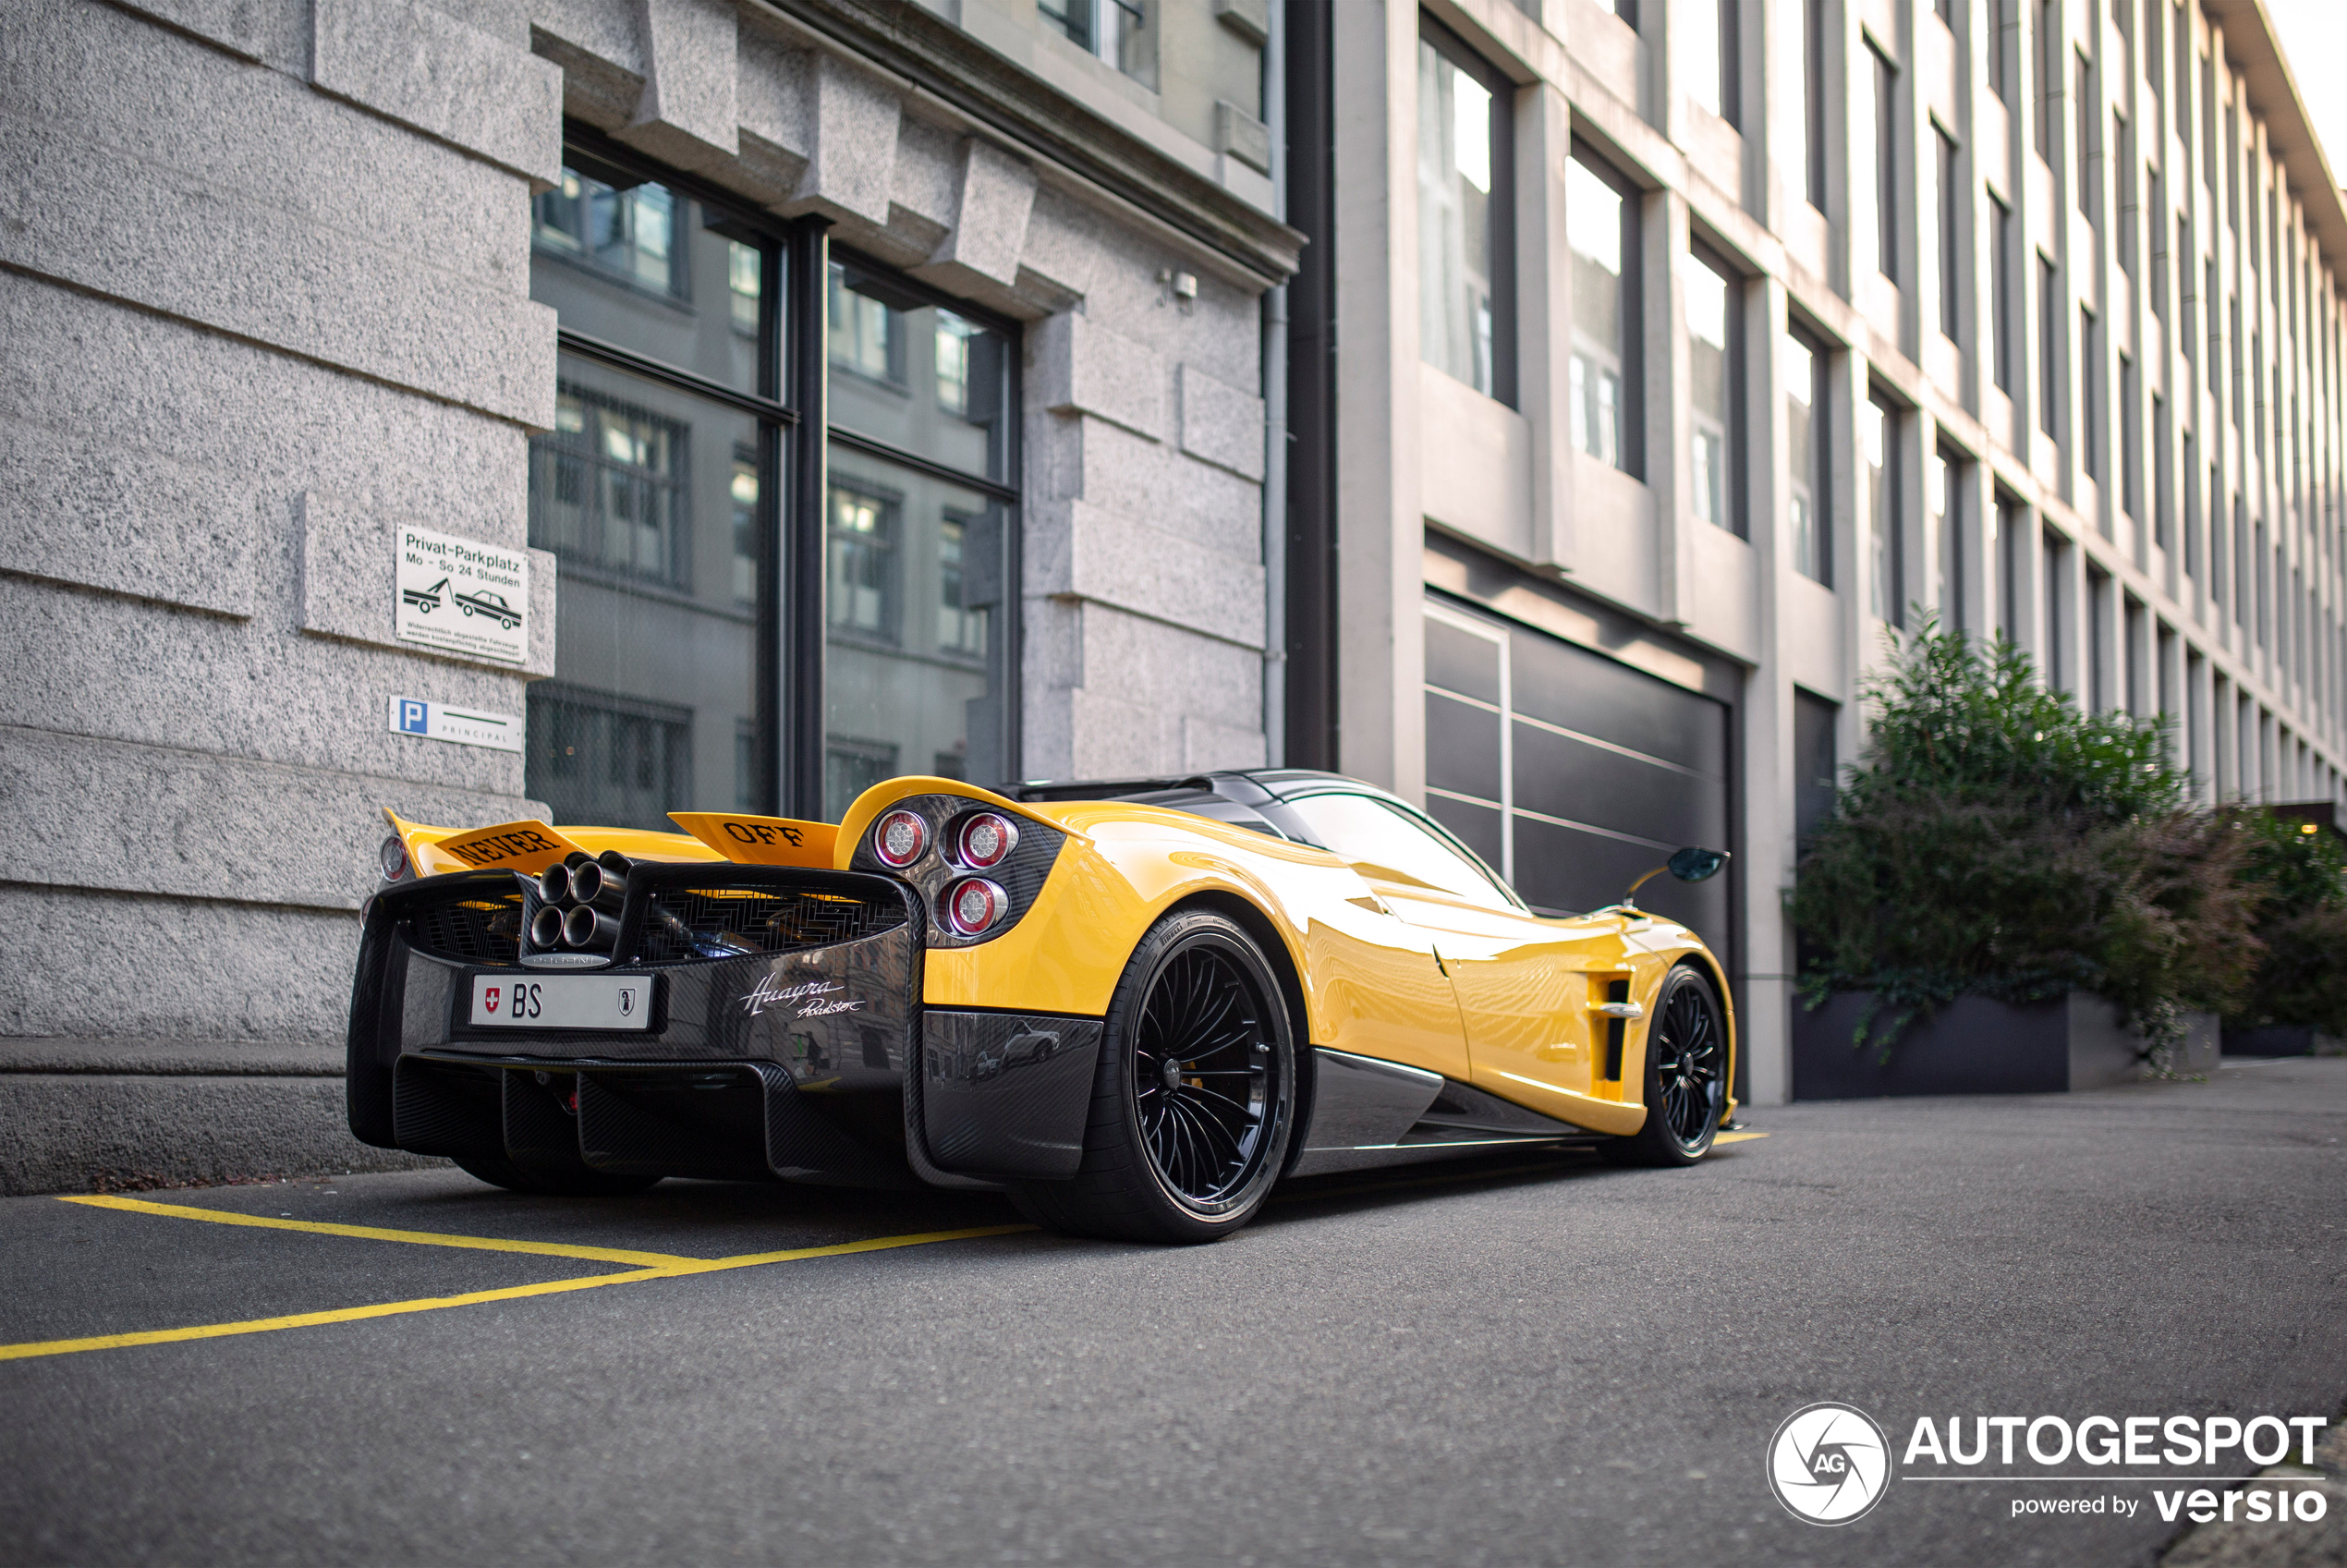 A yellow Huayra Roadster shows up in Zürich